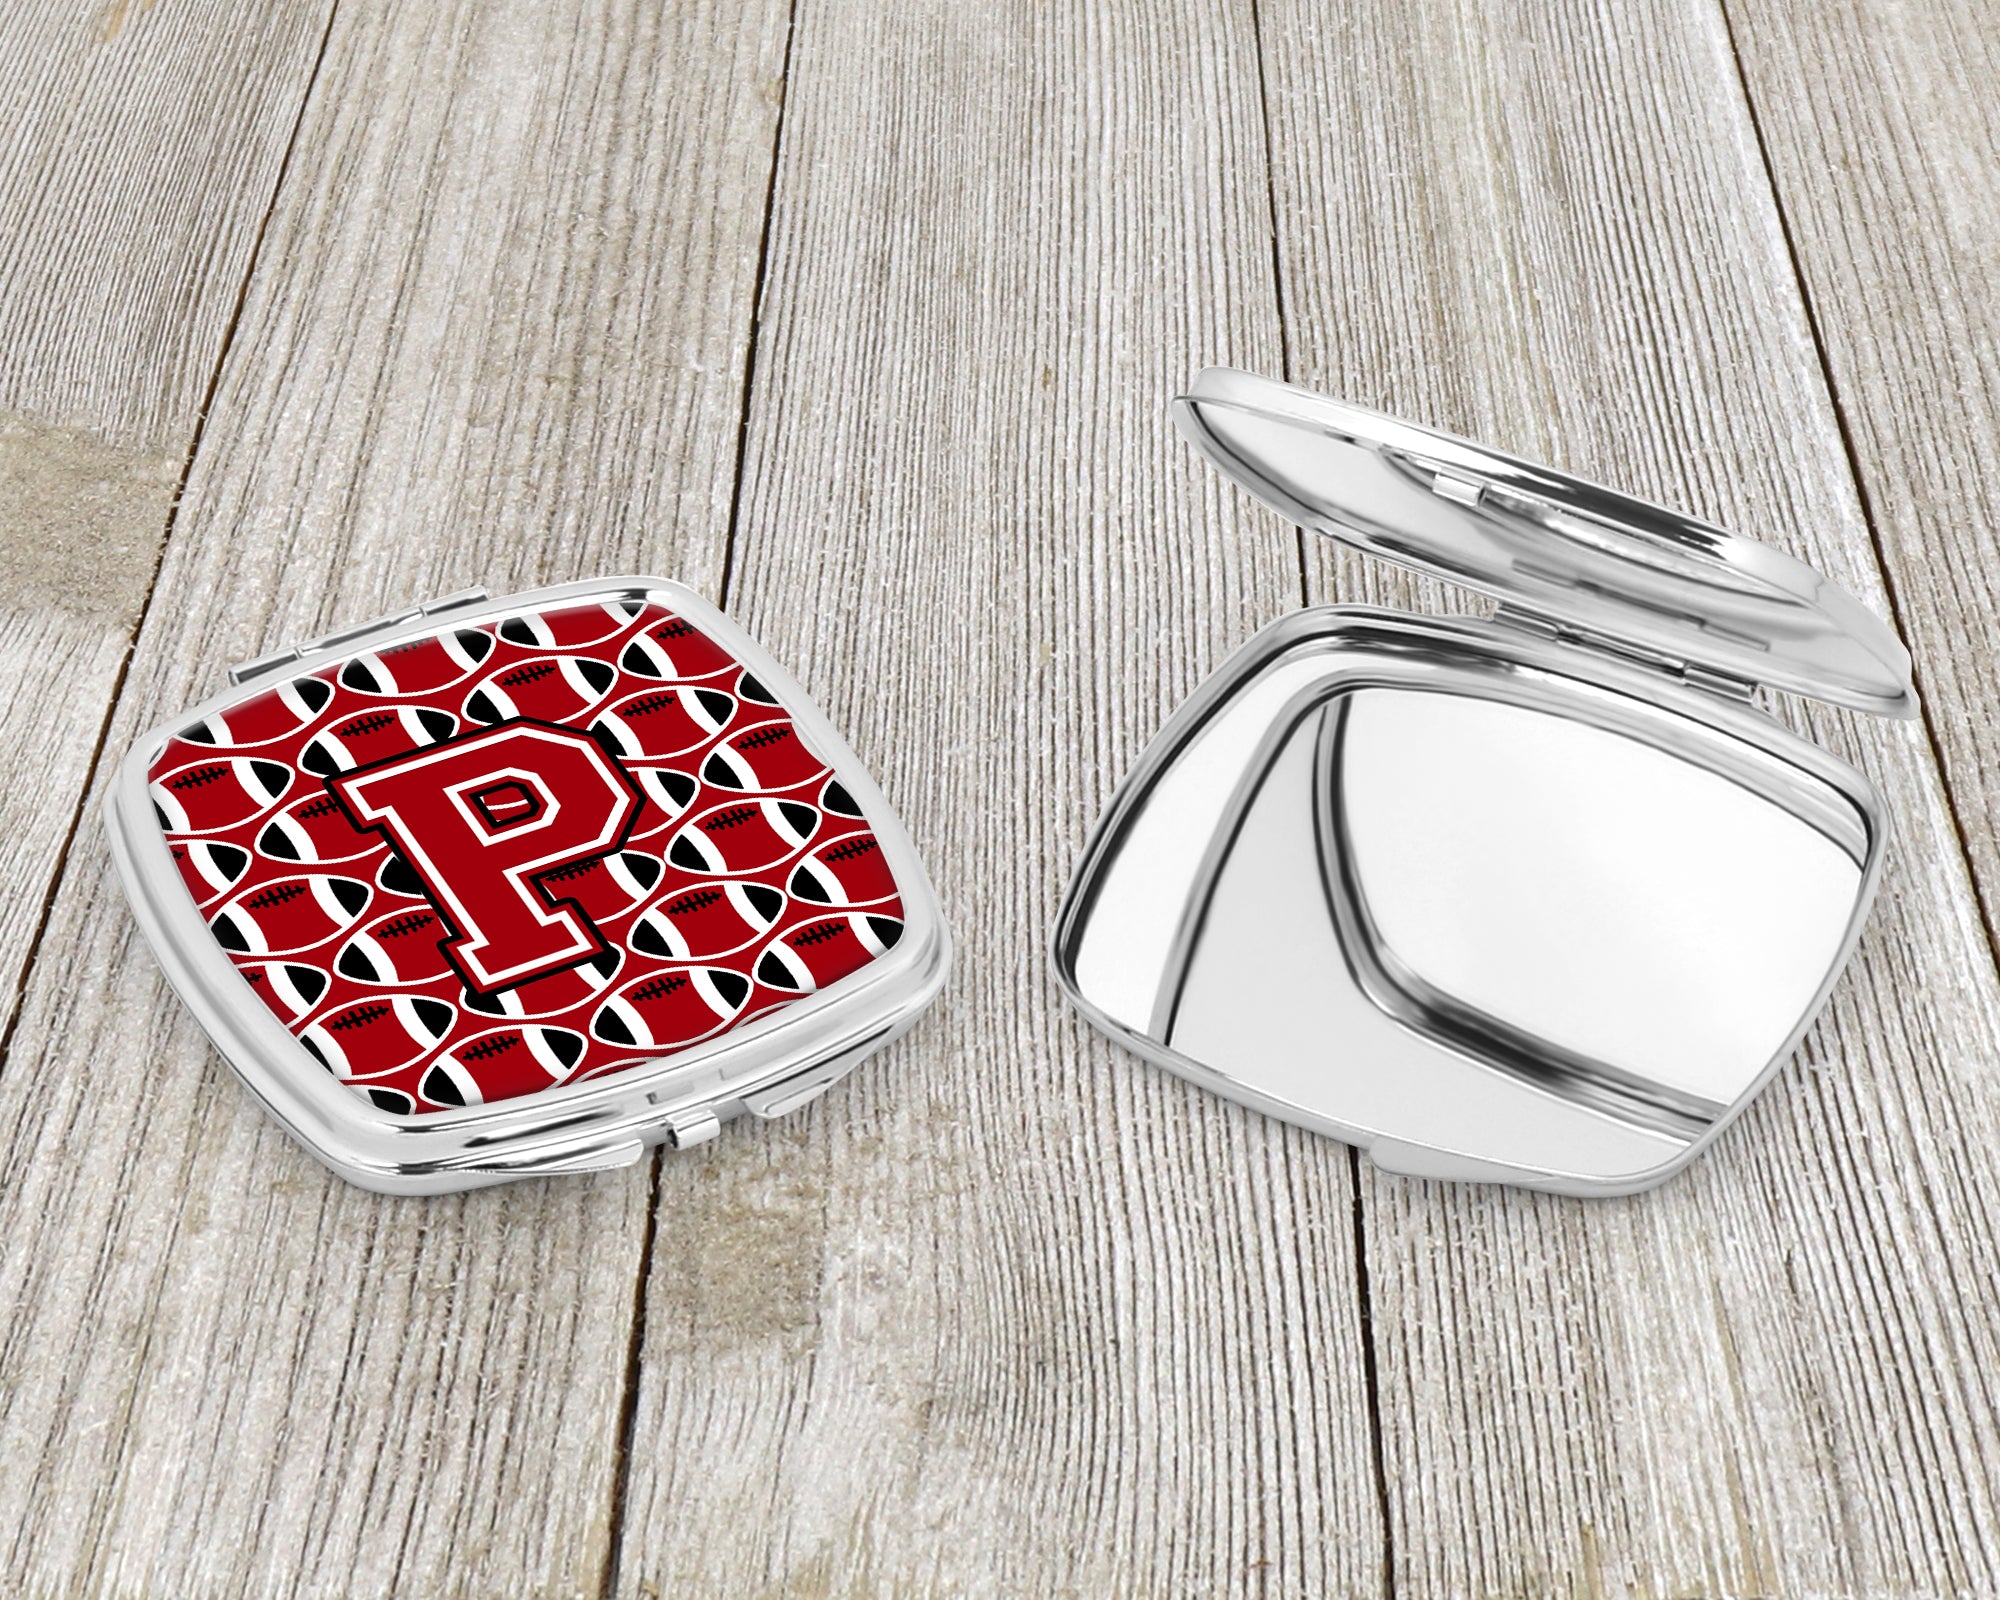 Letter P Football Red, Black and White Compact Mirror CJ1073-PSCM  the-store.com.